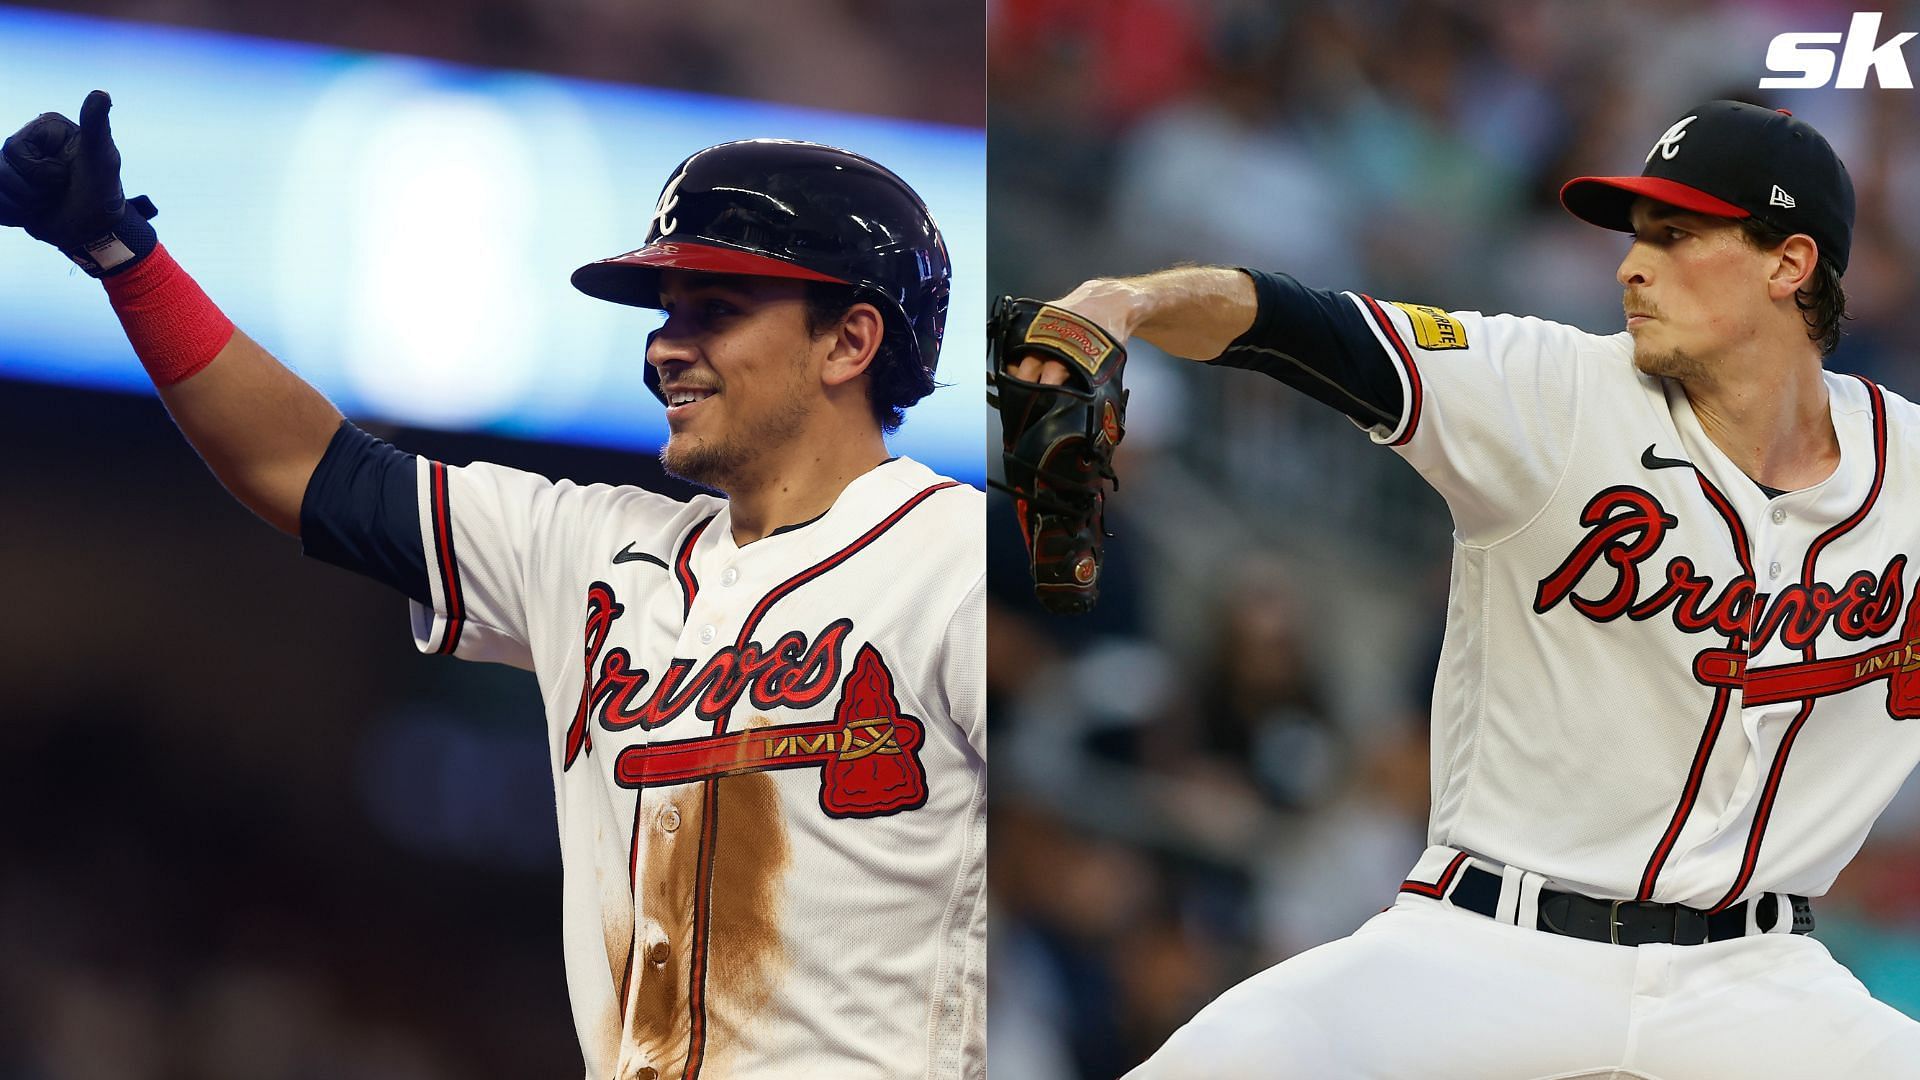 The Atlanta Braves emerge victorious over the New York Yankees